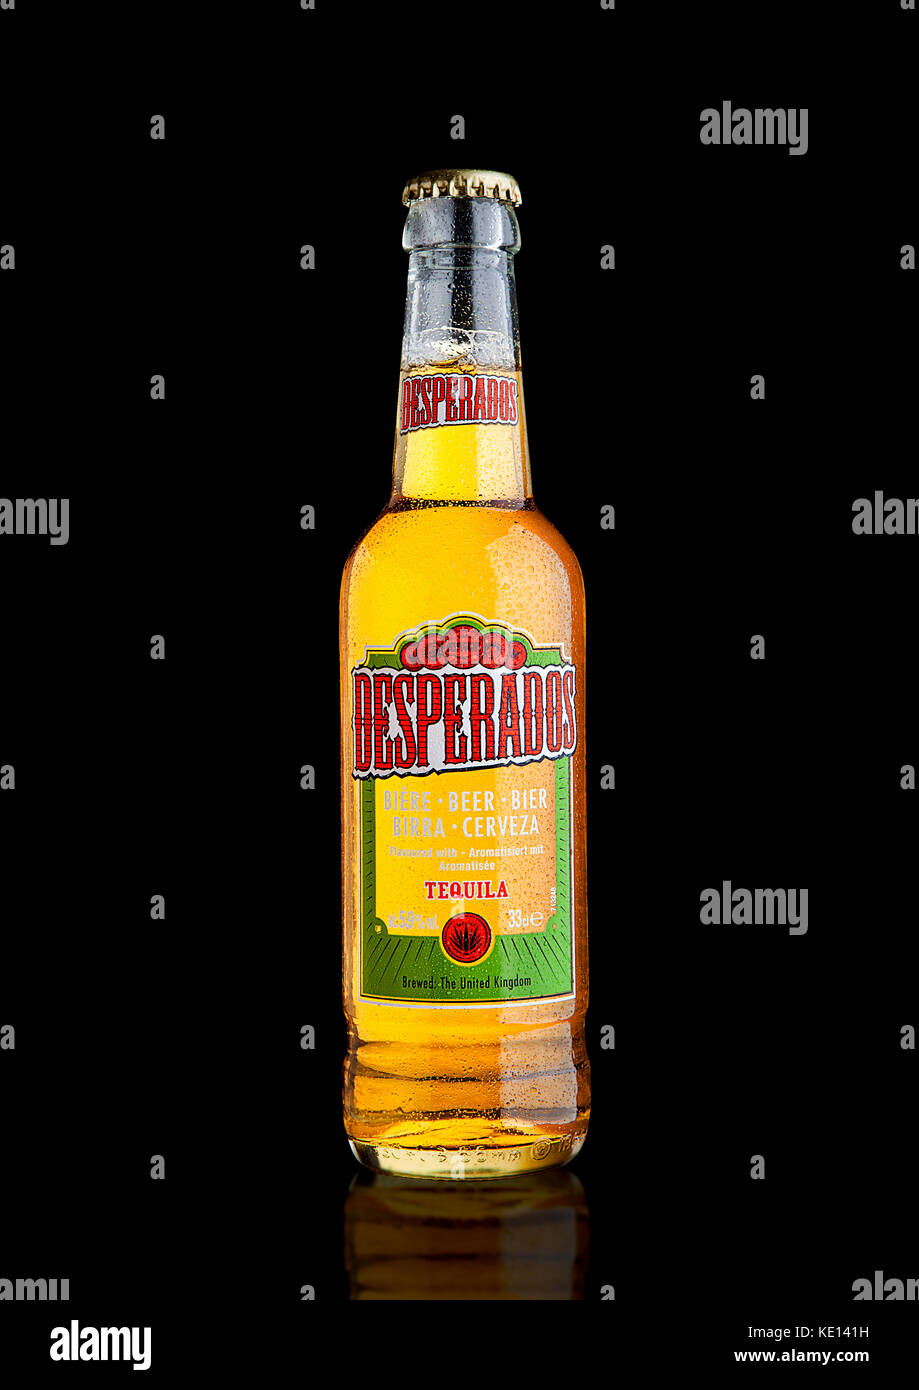 LONDON, UK - DECEMBER 15, 2016: Bottle of Desperados beer, lager flavored with tequila is a popular beer produced by Heineken and sold in over 50 coun Stock Photo